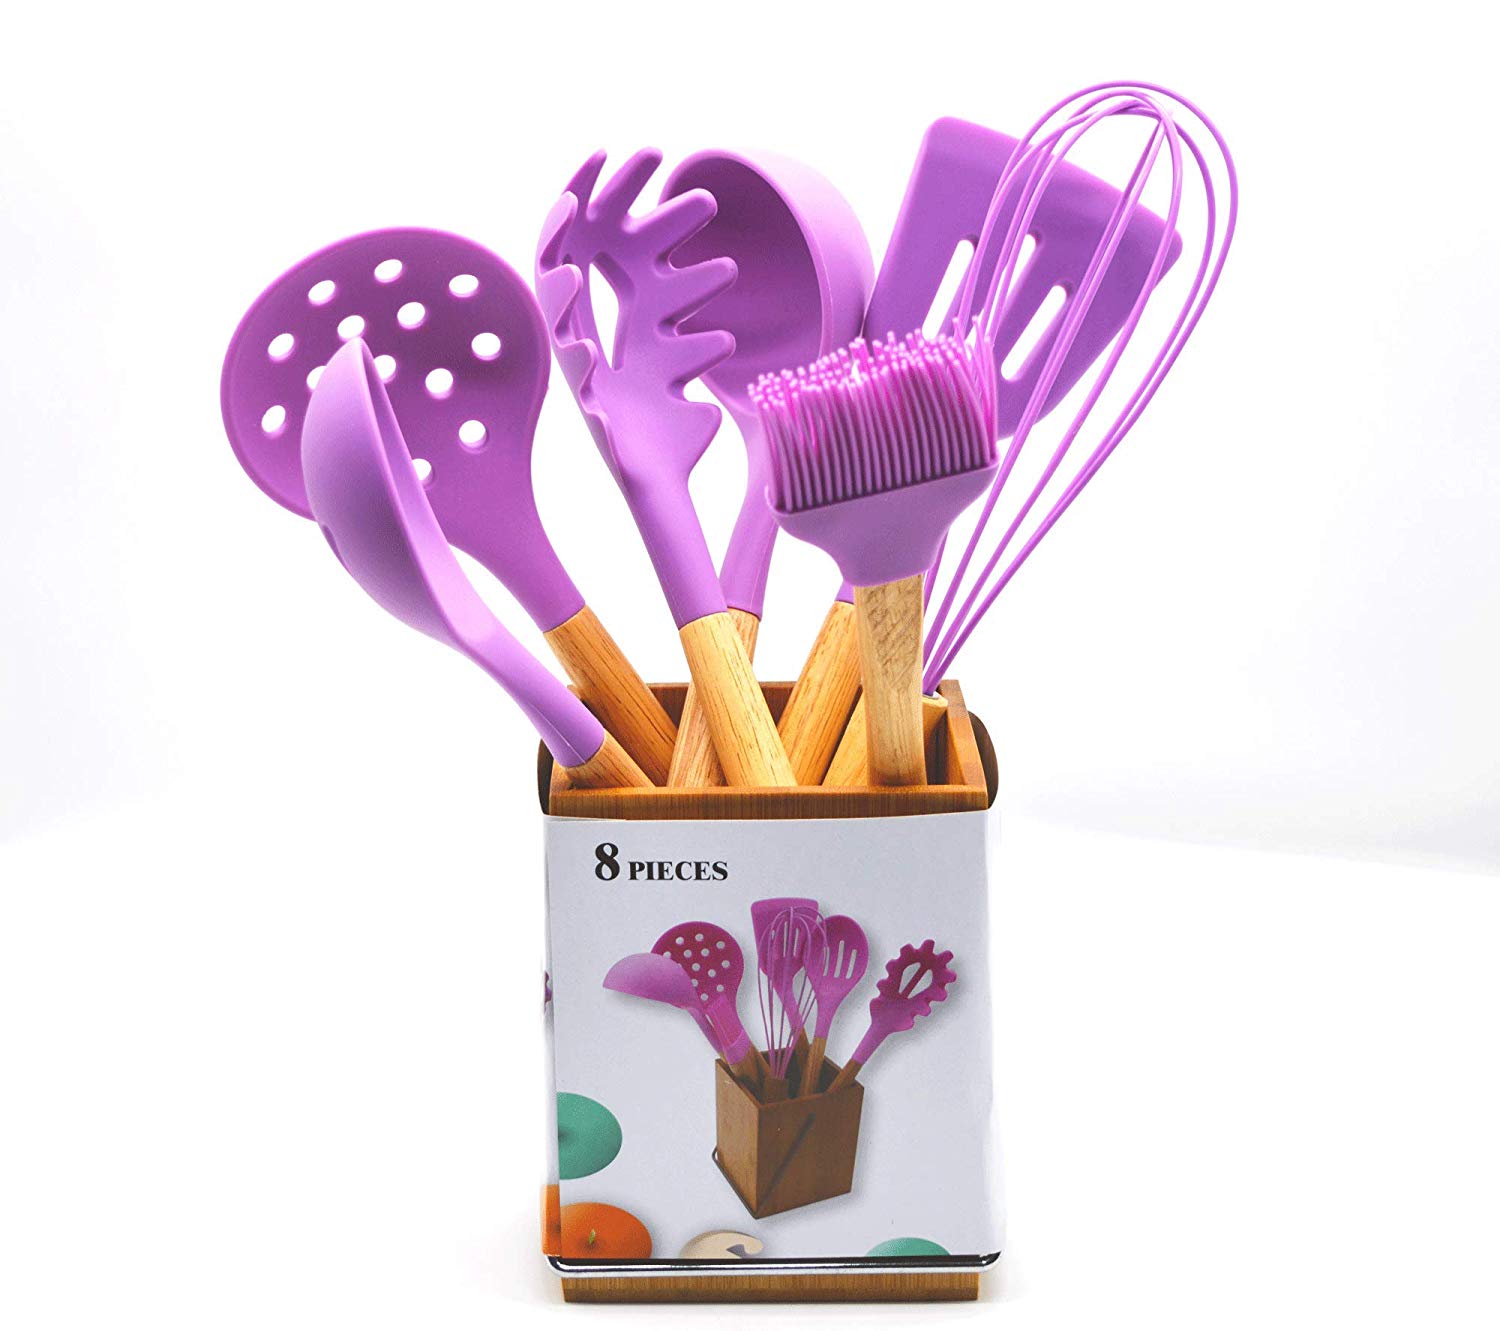 8 Piece Silicone Cooking Utensils Set With Holder purple